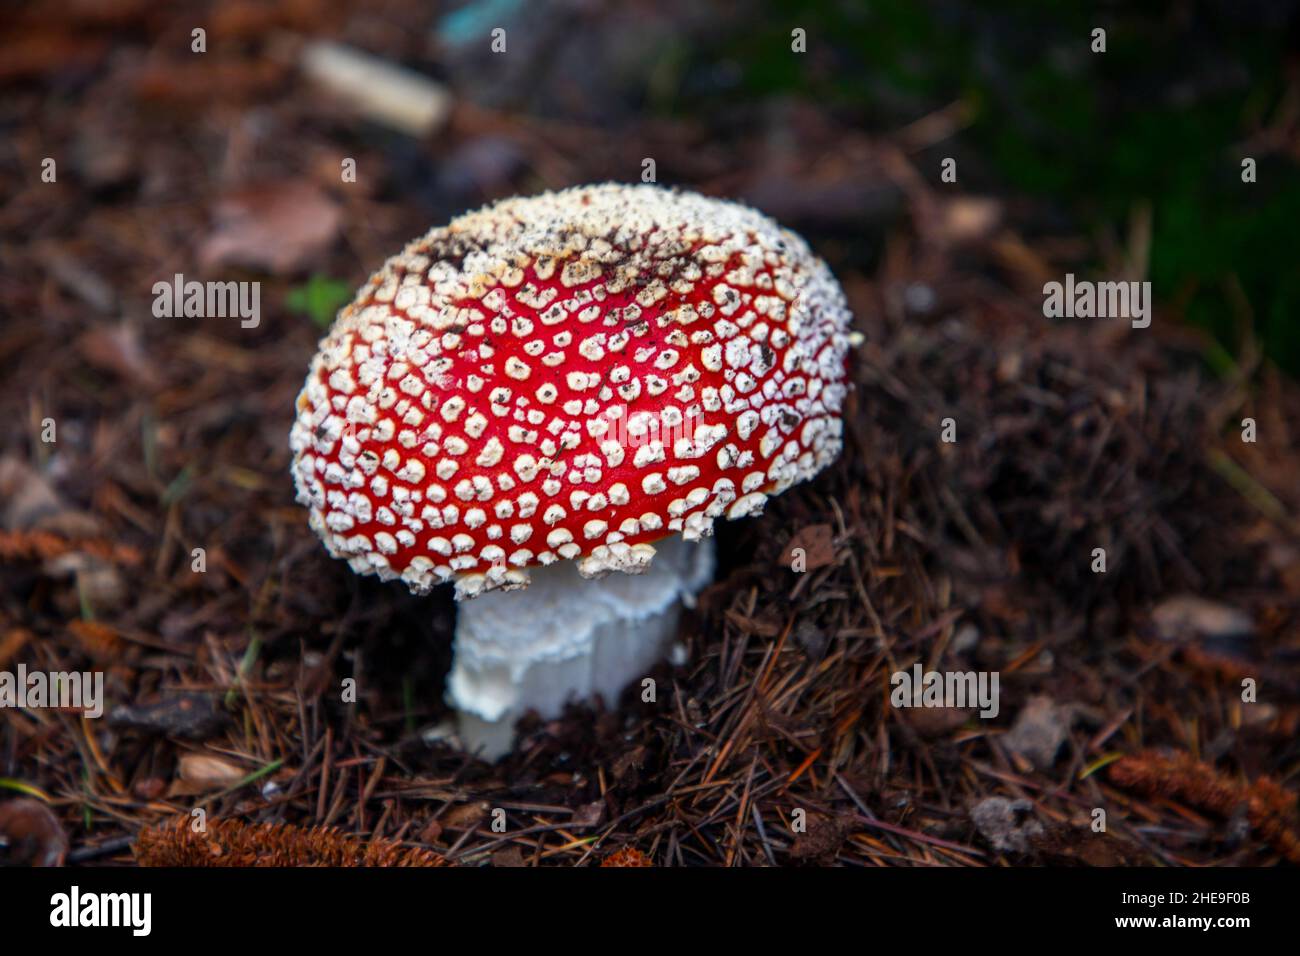 The toxic Fly Agaric Mushroom (Amanita Muscaria) growing underneath a tree after heavy rains. Known for its appearance in Alice in Wonderland. Stock Photo